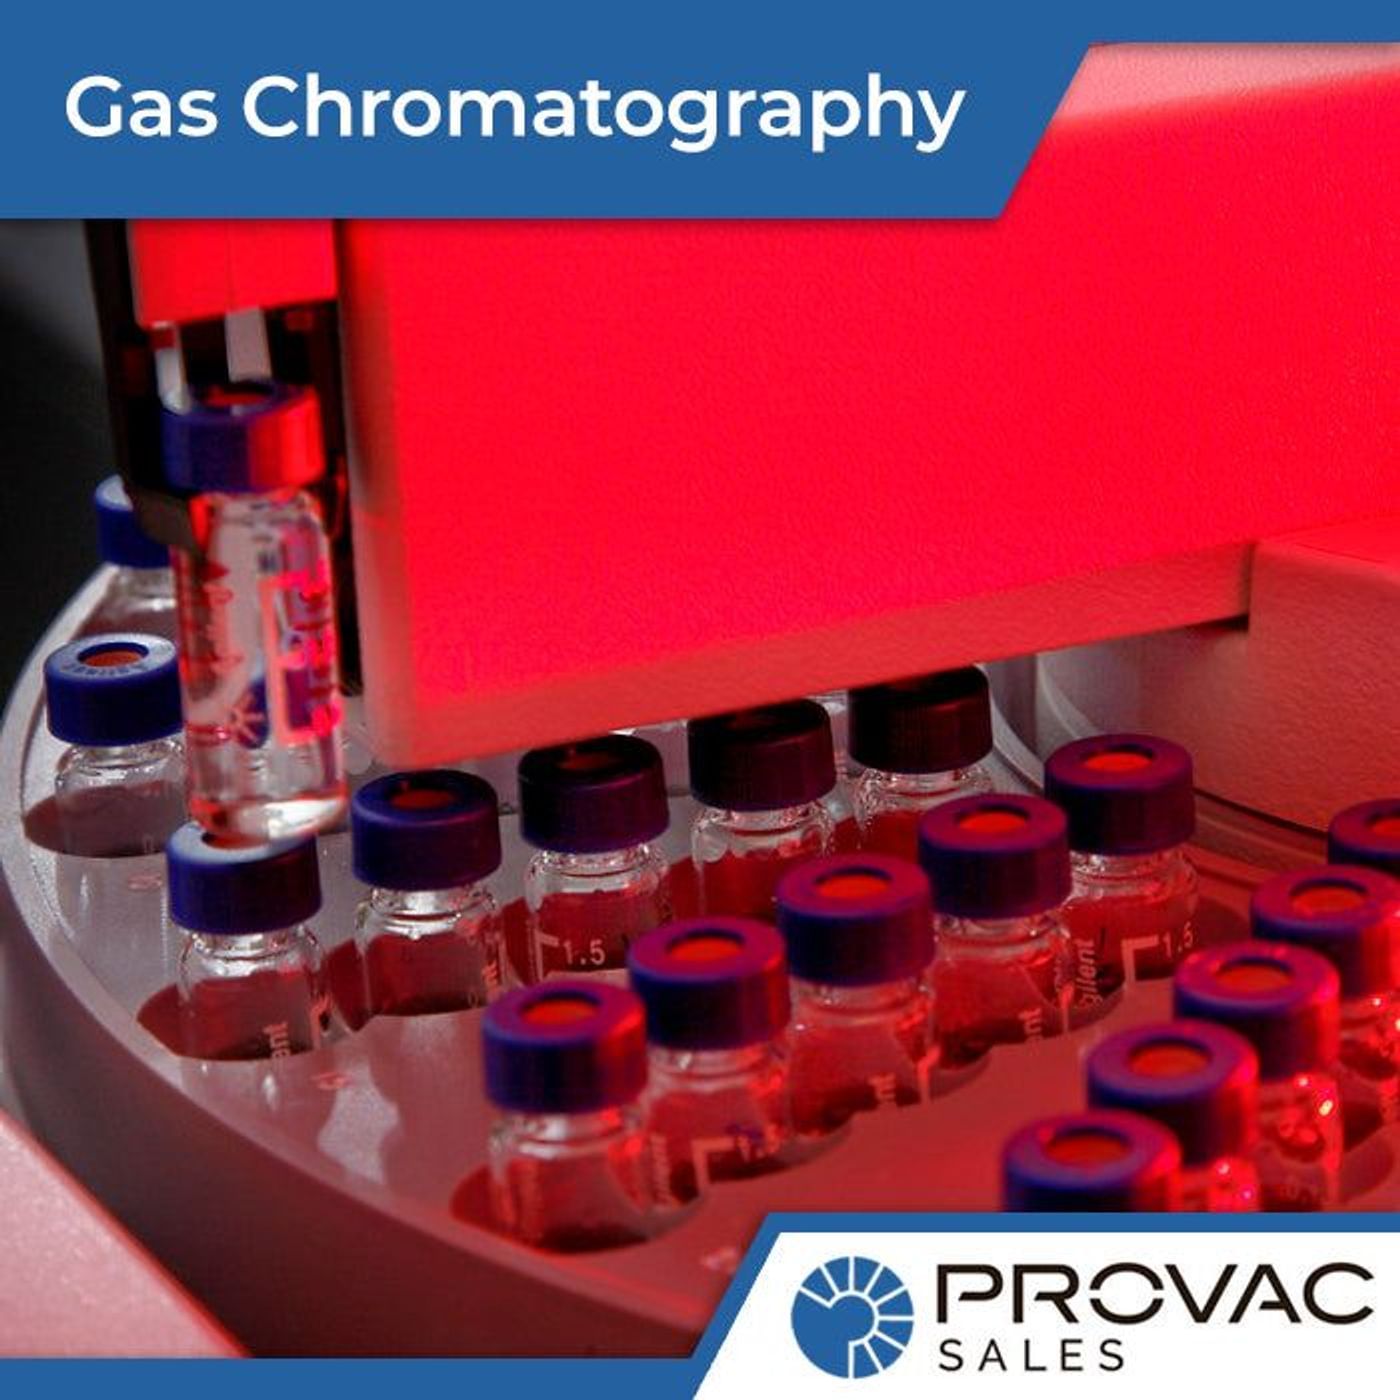 What is Gas Chromatography?